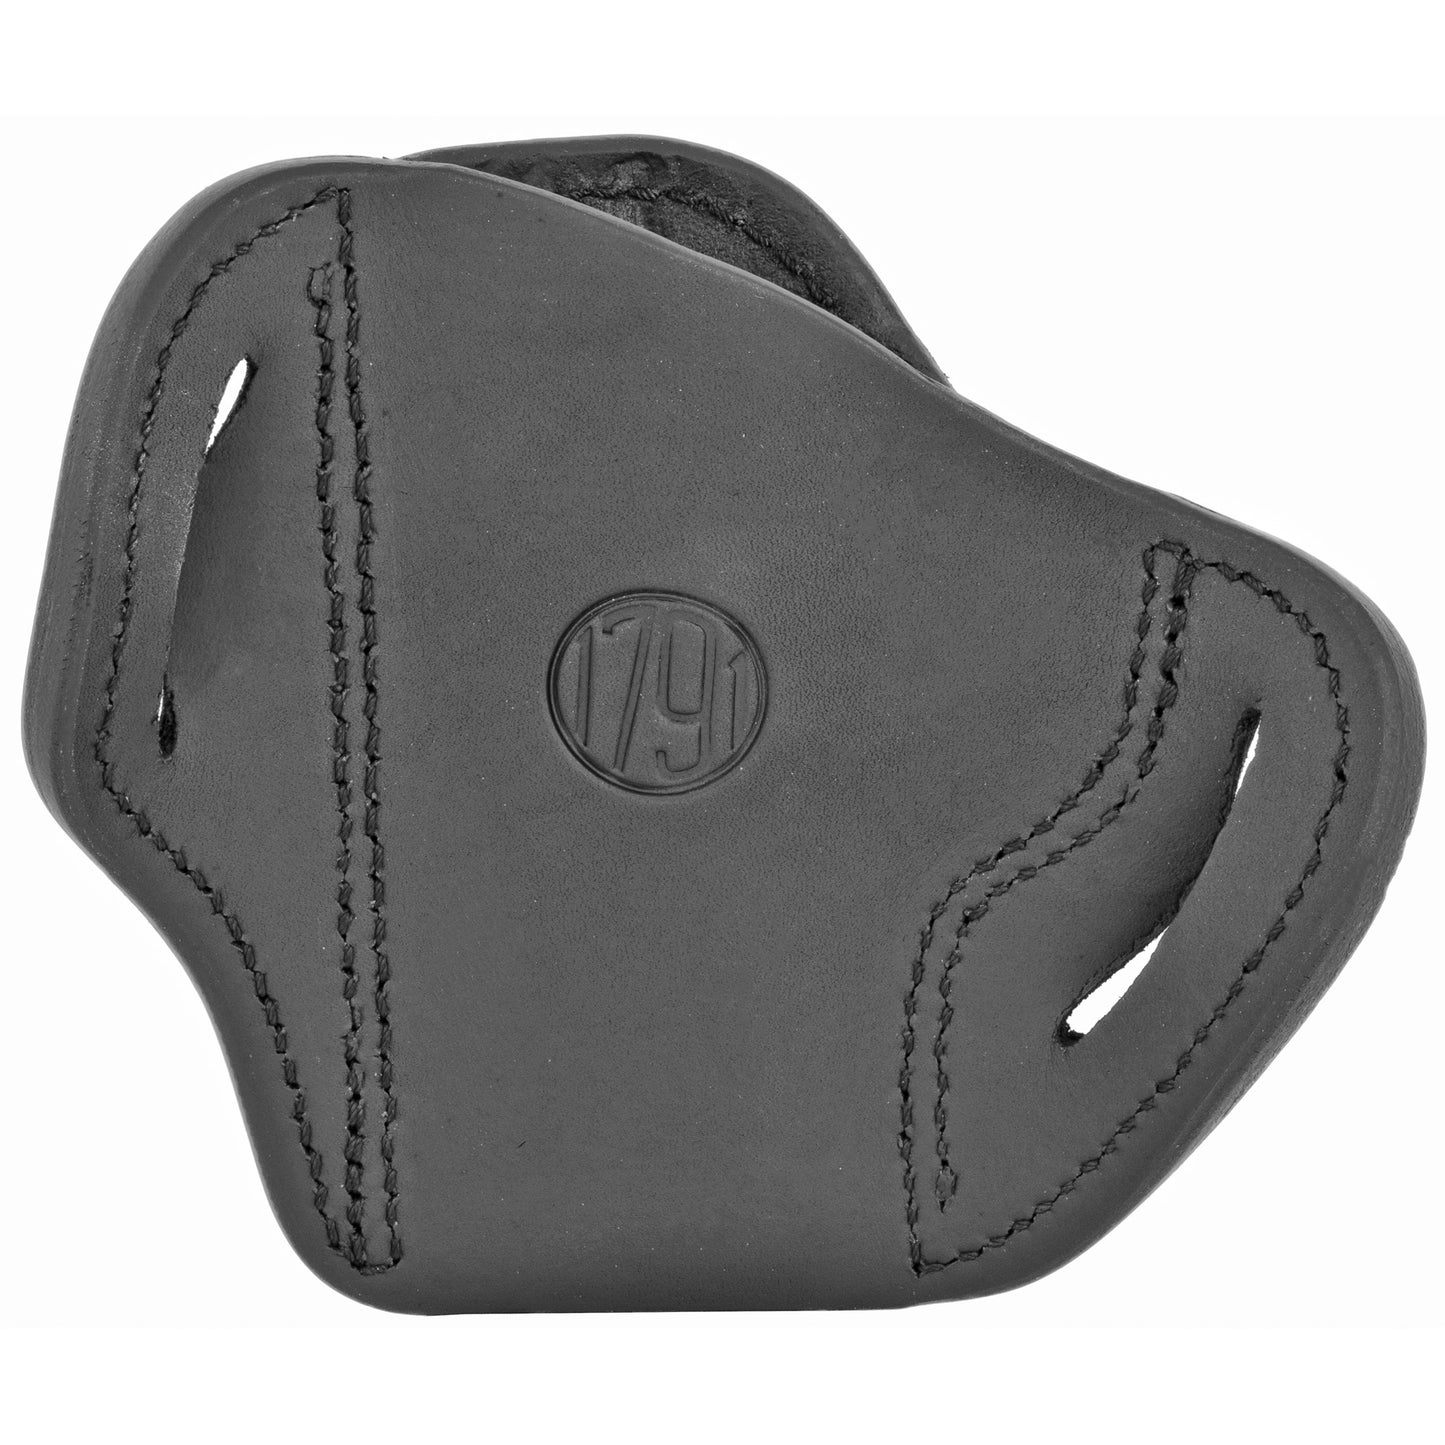 1791 Belt Holster 2.4 Right Hand Stealth Black Leather Fits Sig P320c, P229